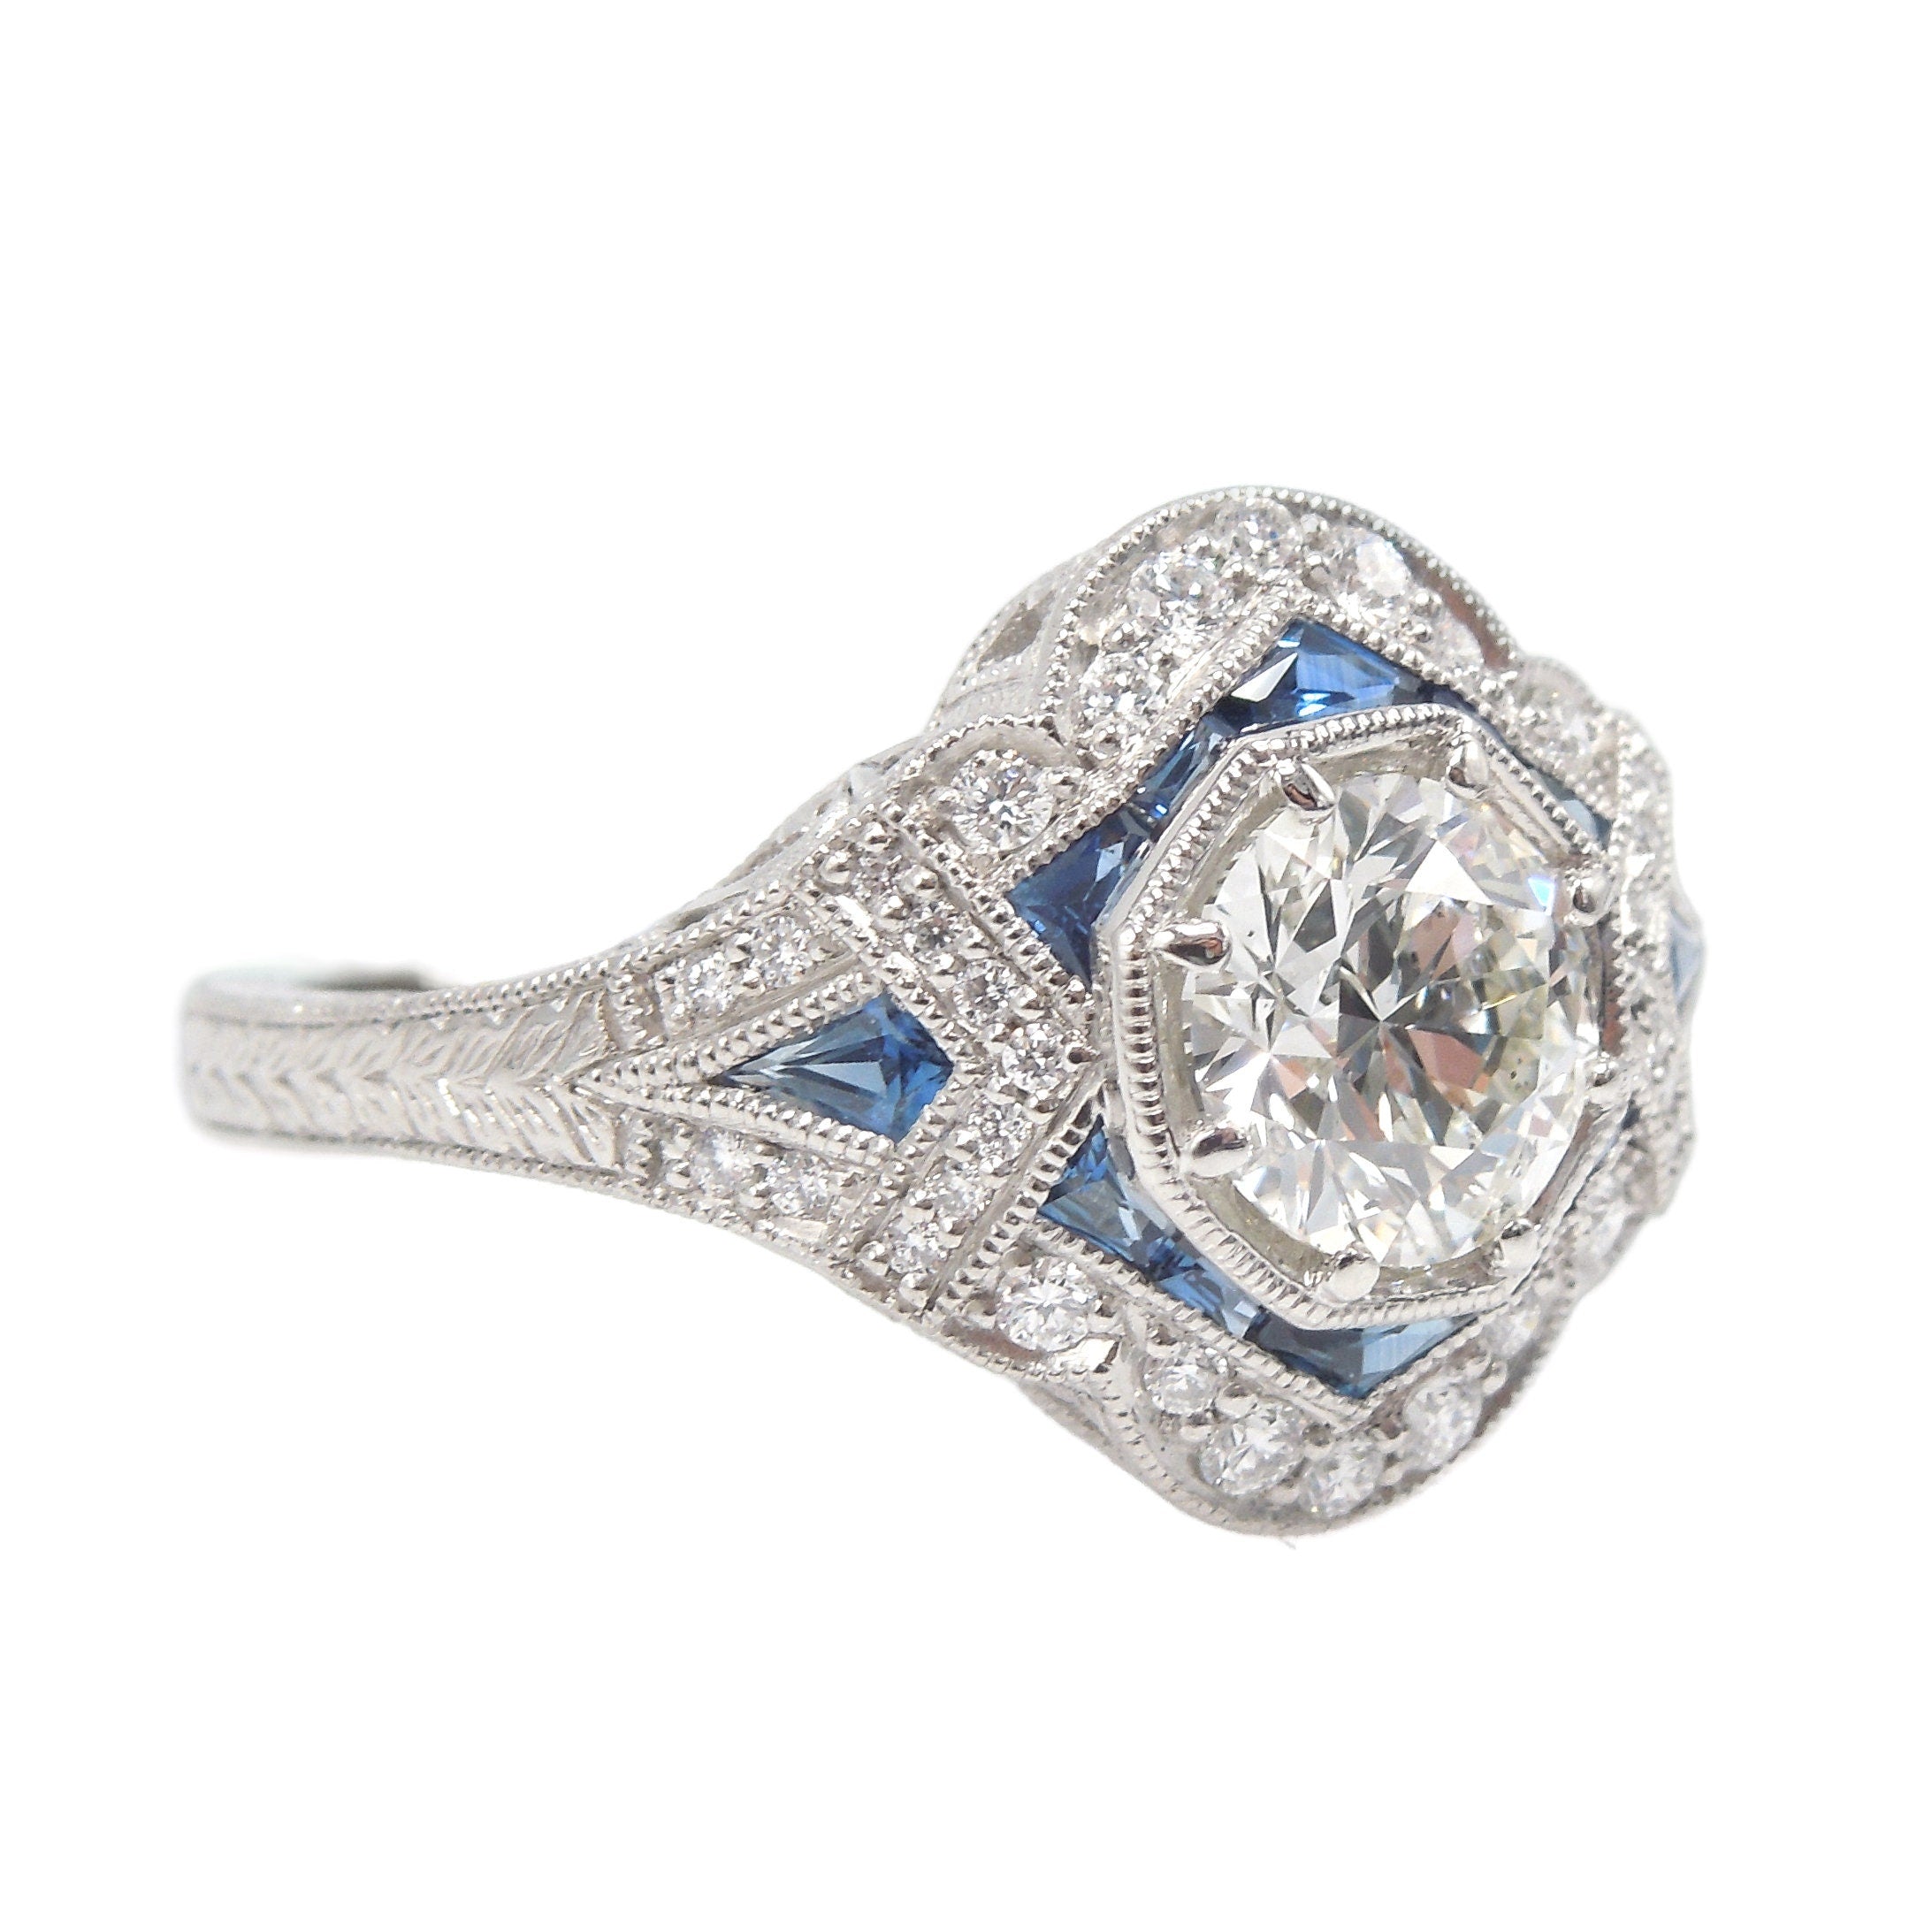 Art Deco Style Platinum, Diamond and French Cut Sapphire Engagement Ring with 1.00 Carat Center Diamond